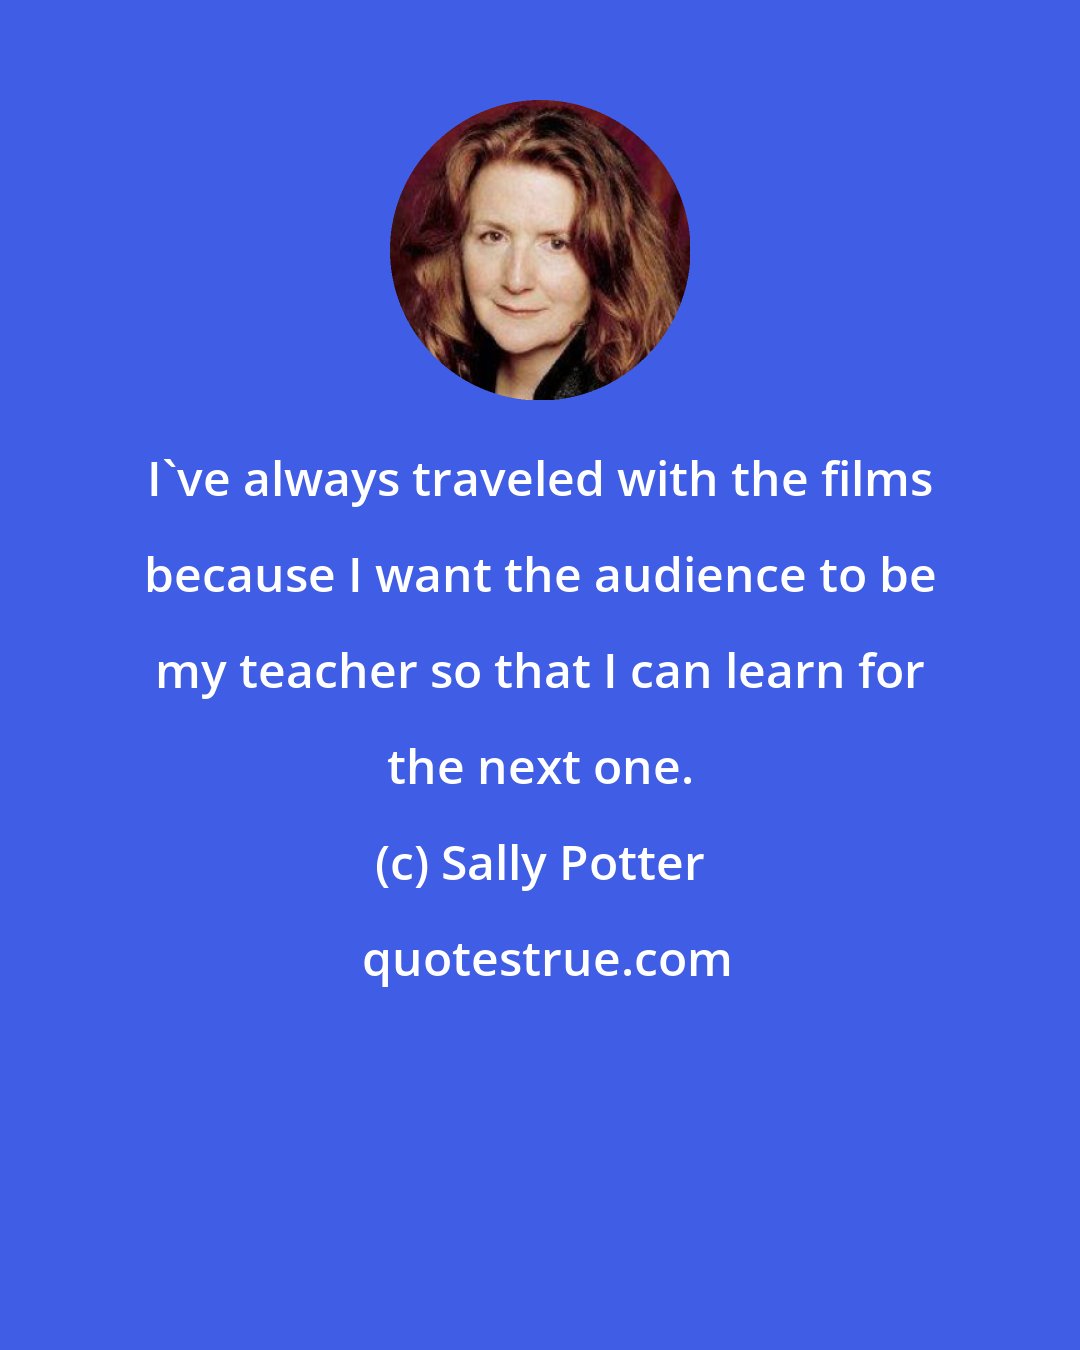 Sally Potter: I've always traveled with the films because I want the audience to be my teacher so that I can learn for the next one.